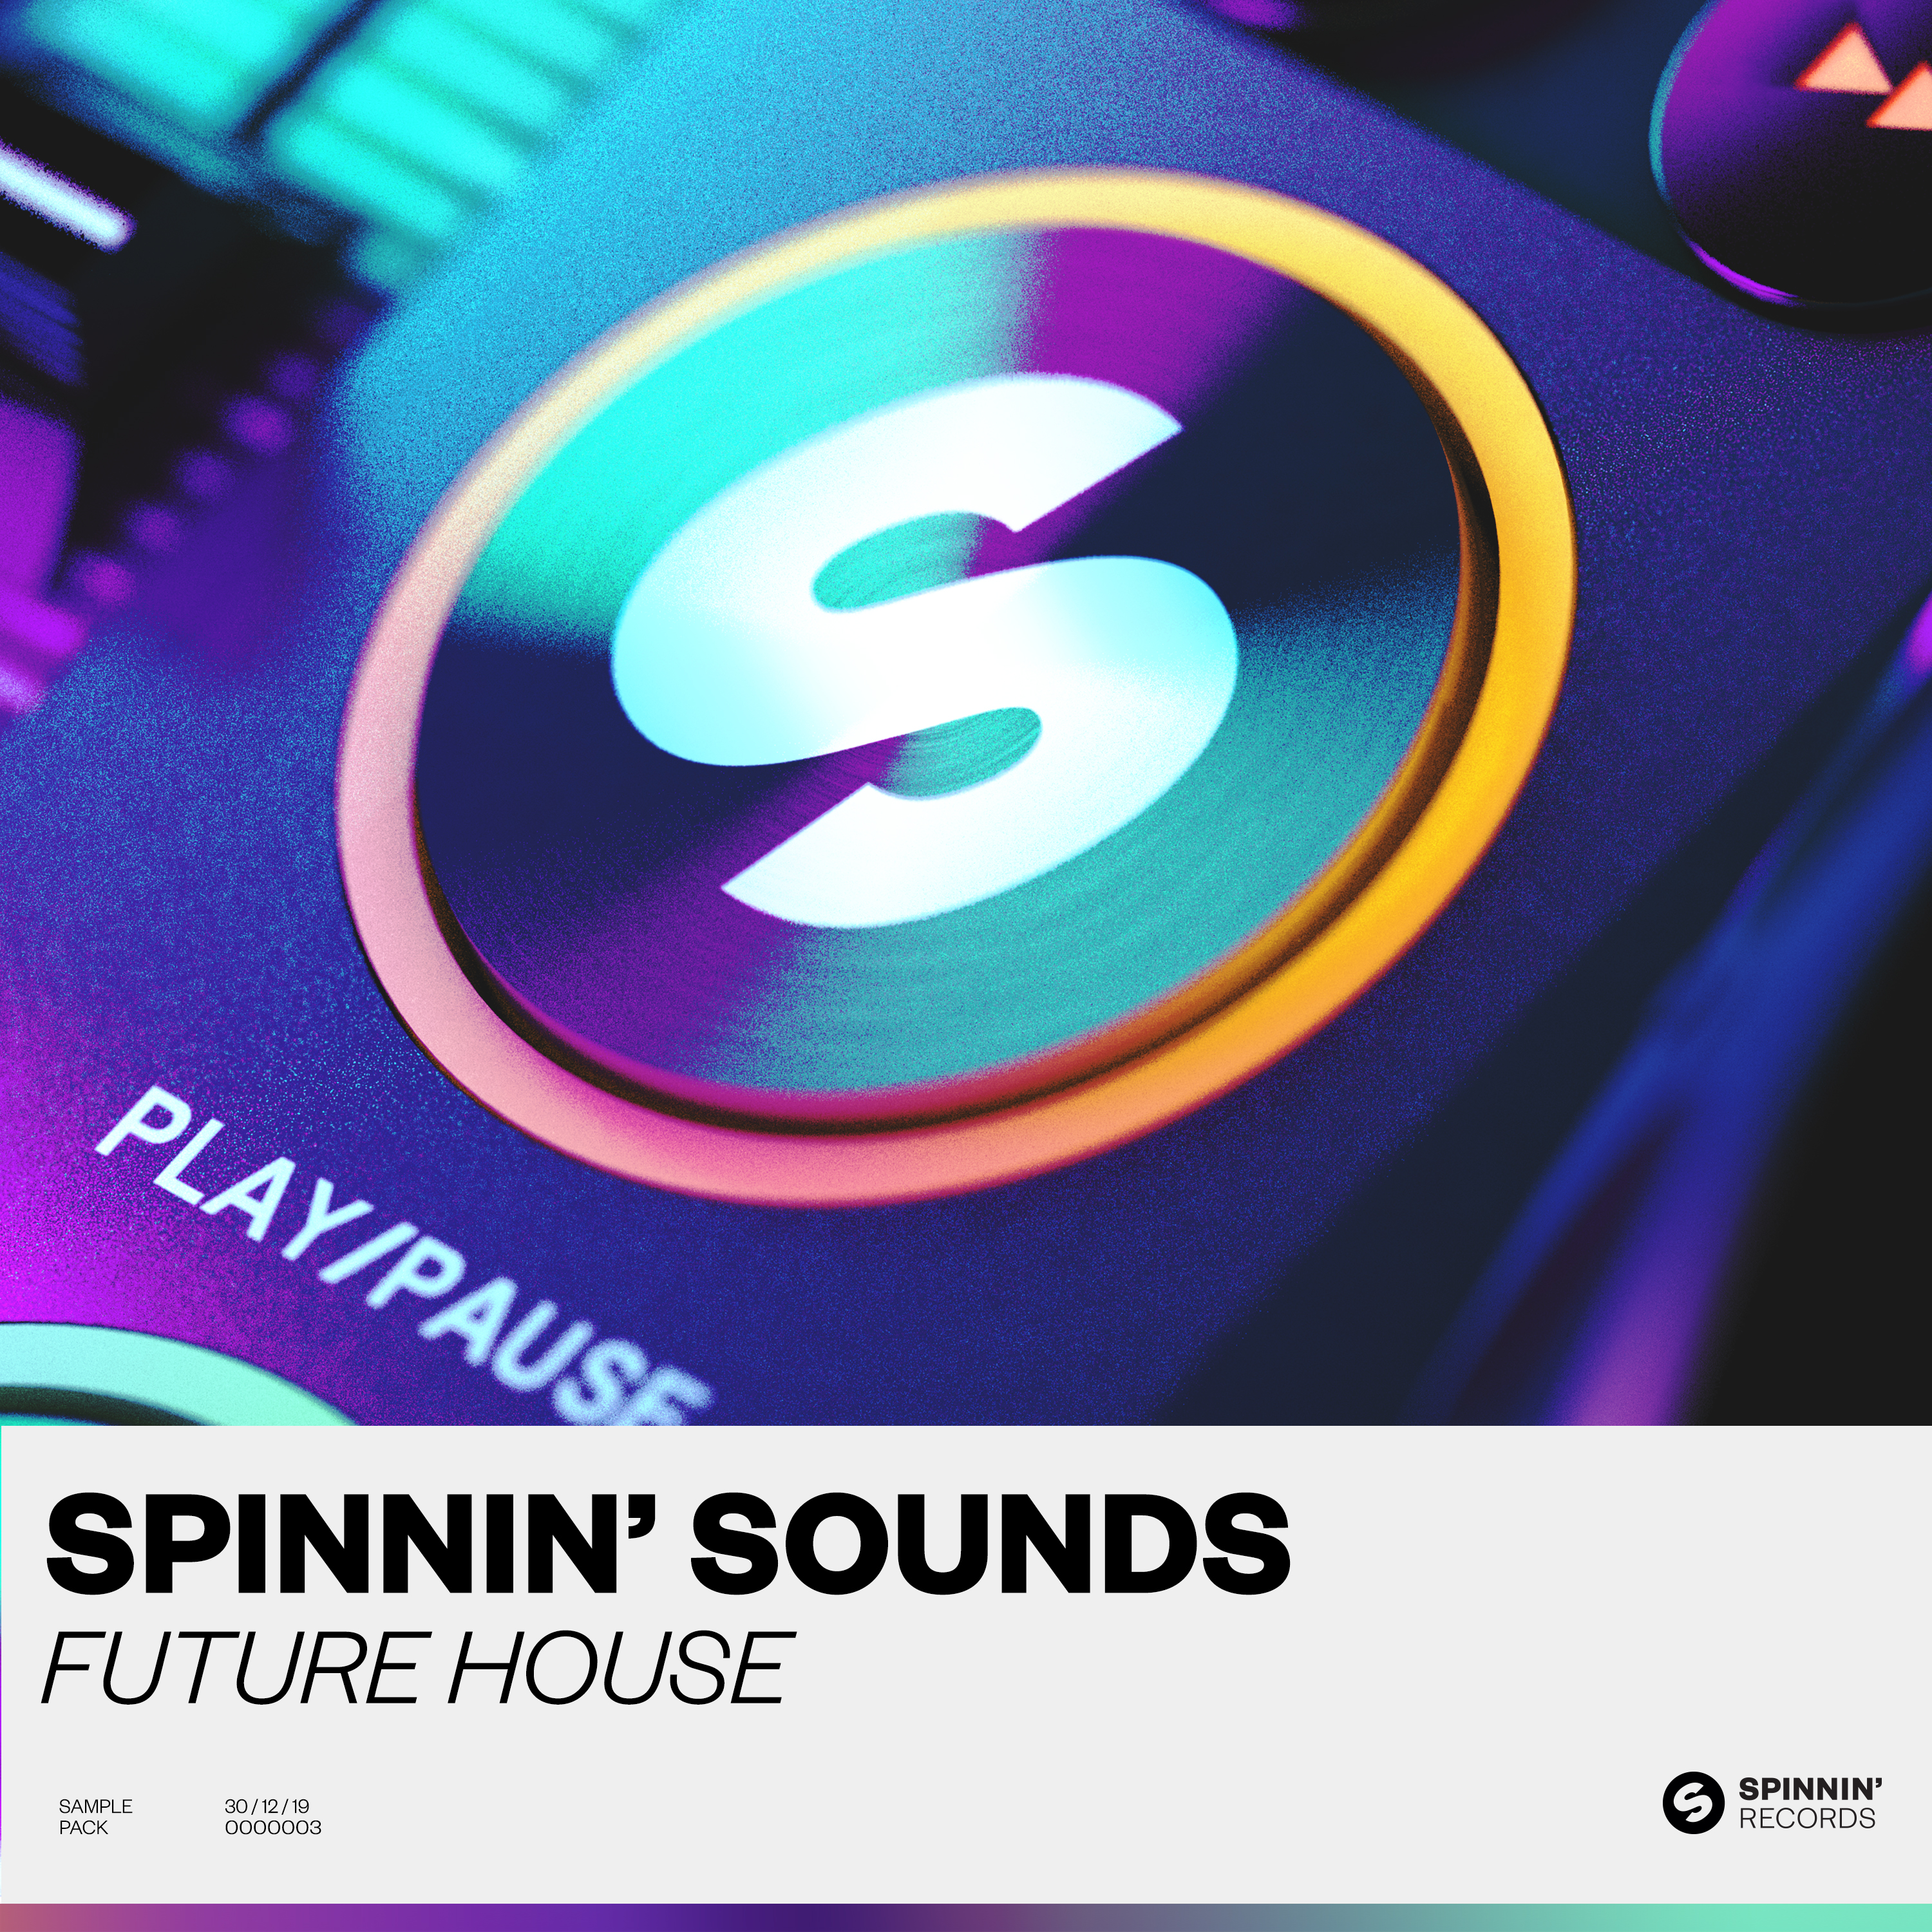 Spinnin' Sounds x Splice presents its third sample pack: Future